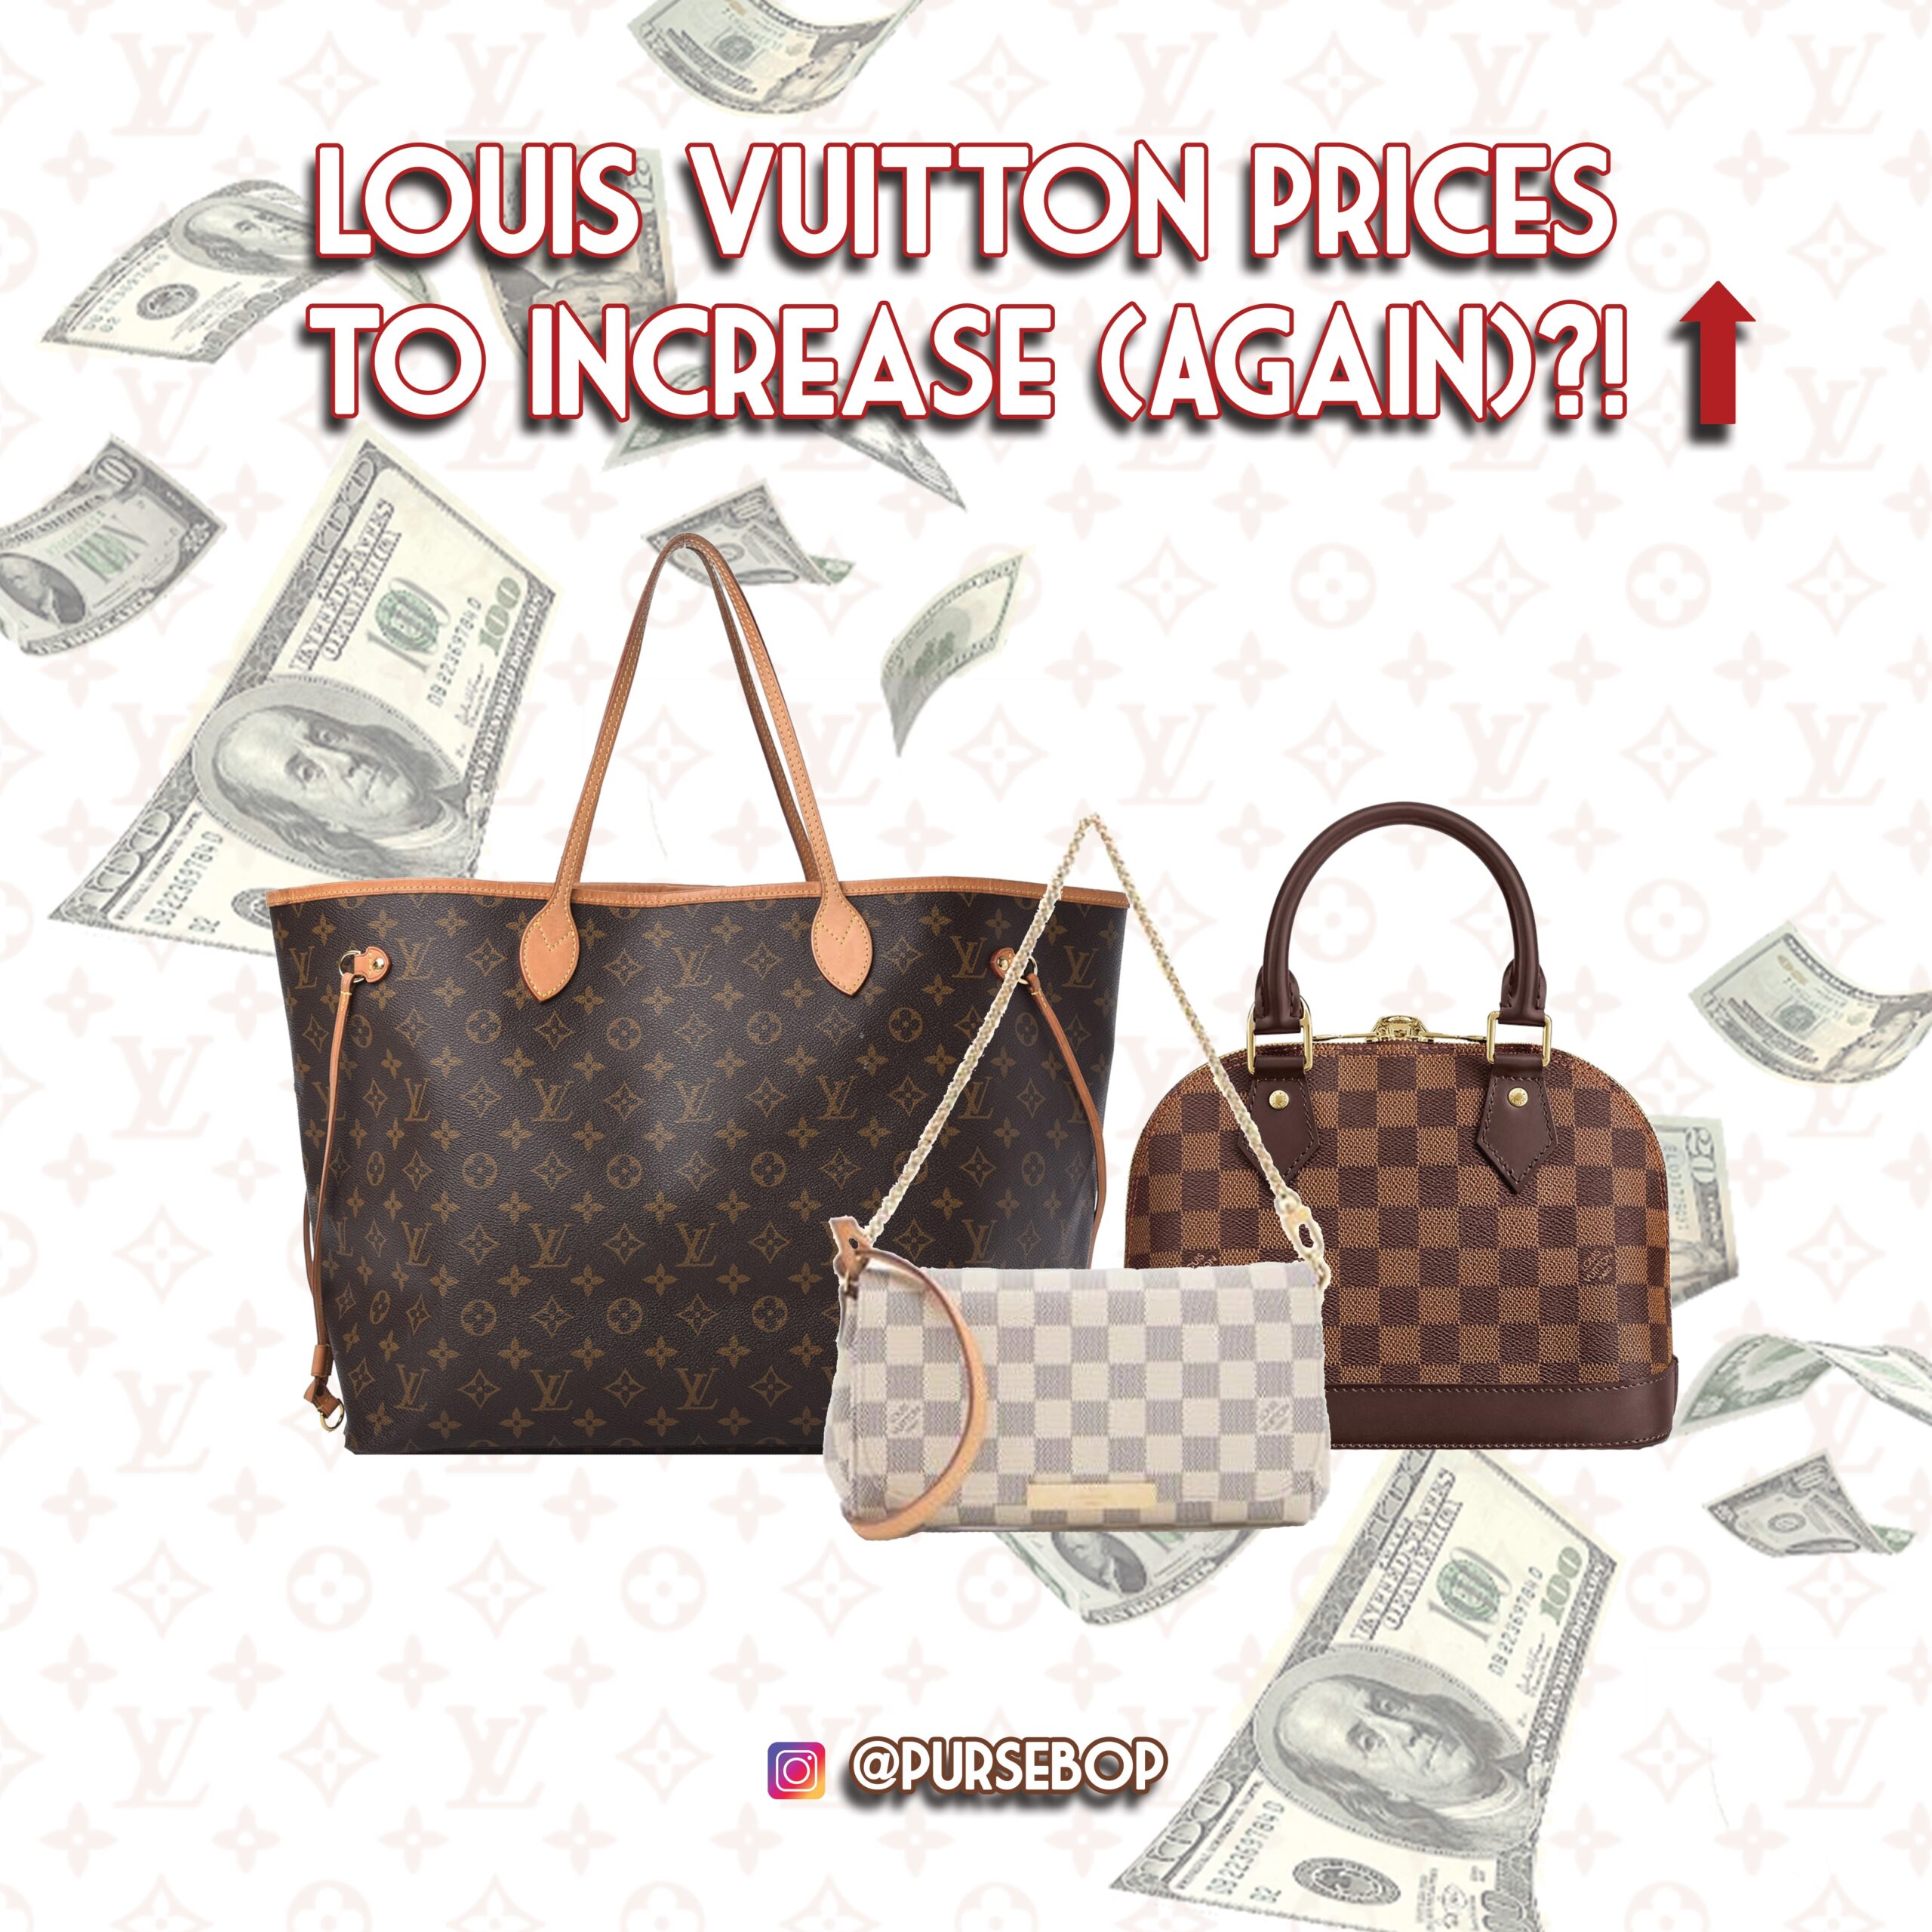 UPDATED NEWS: Here are the New Louis Vuitton Prices 2022